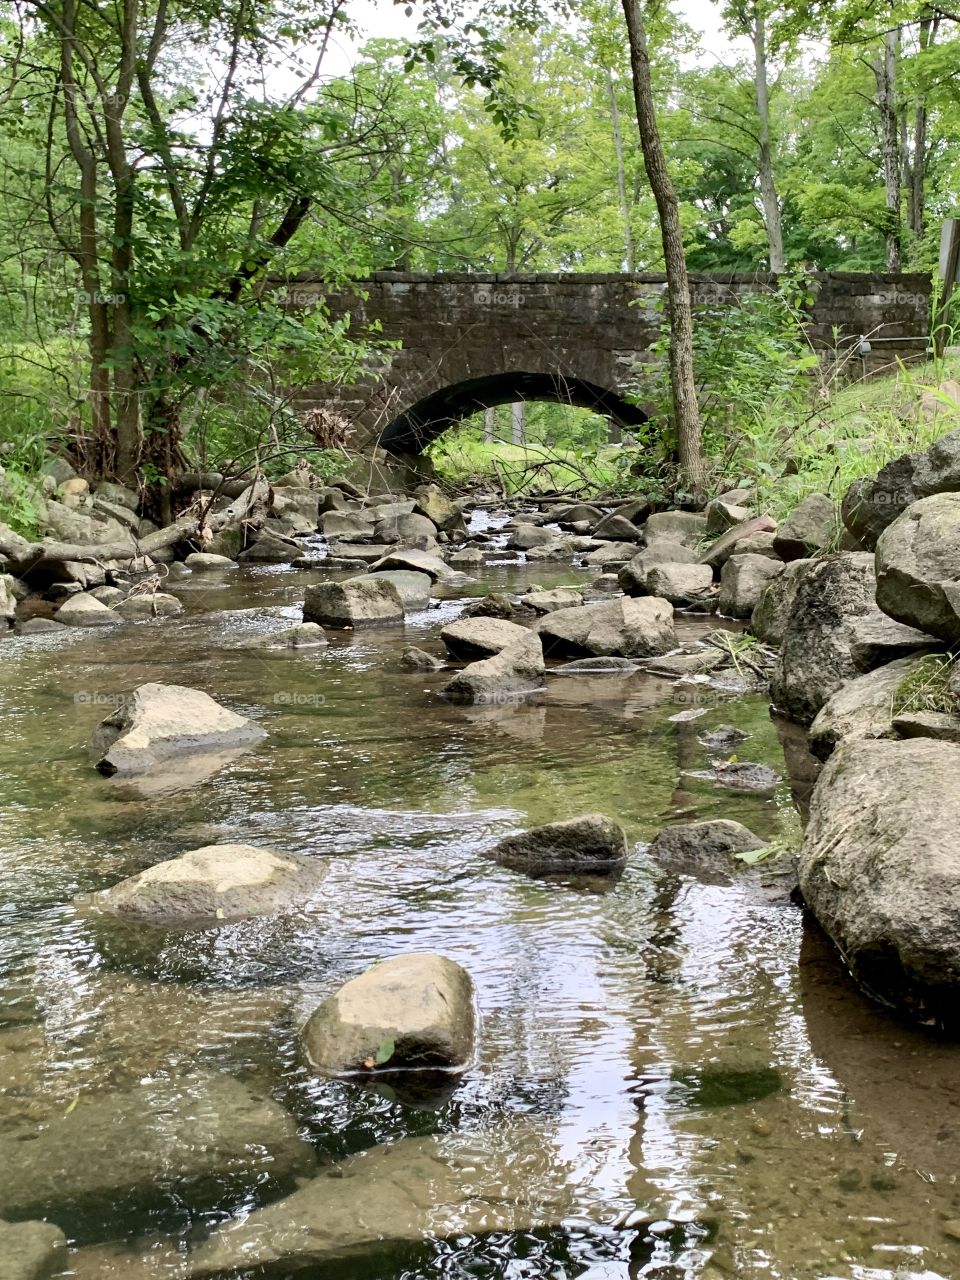 Stone bridge and a small stream with some rocks